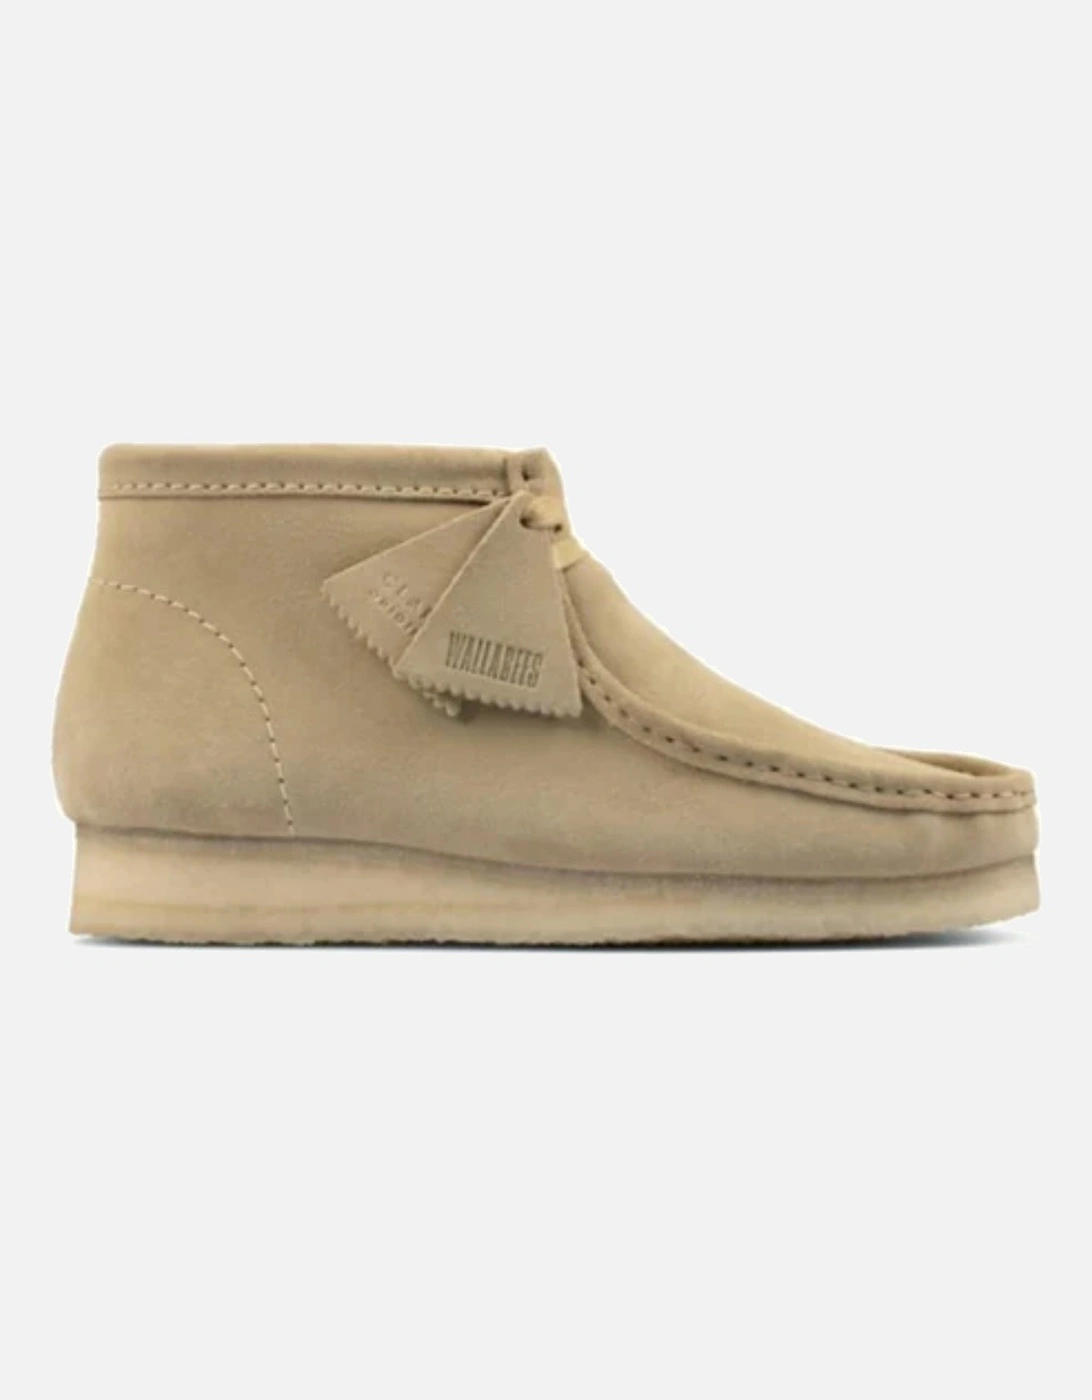 Wallabee Boot - Maple Suede, 8 of 7